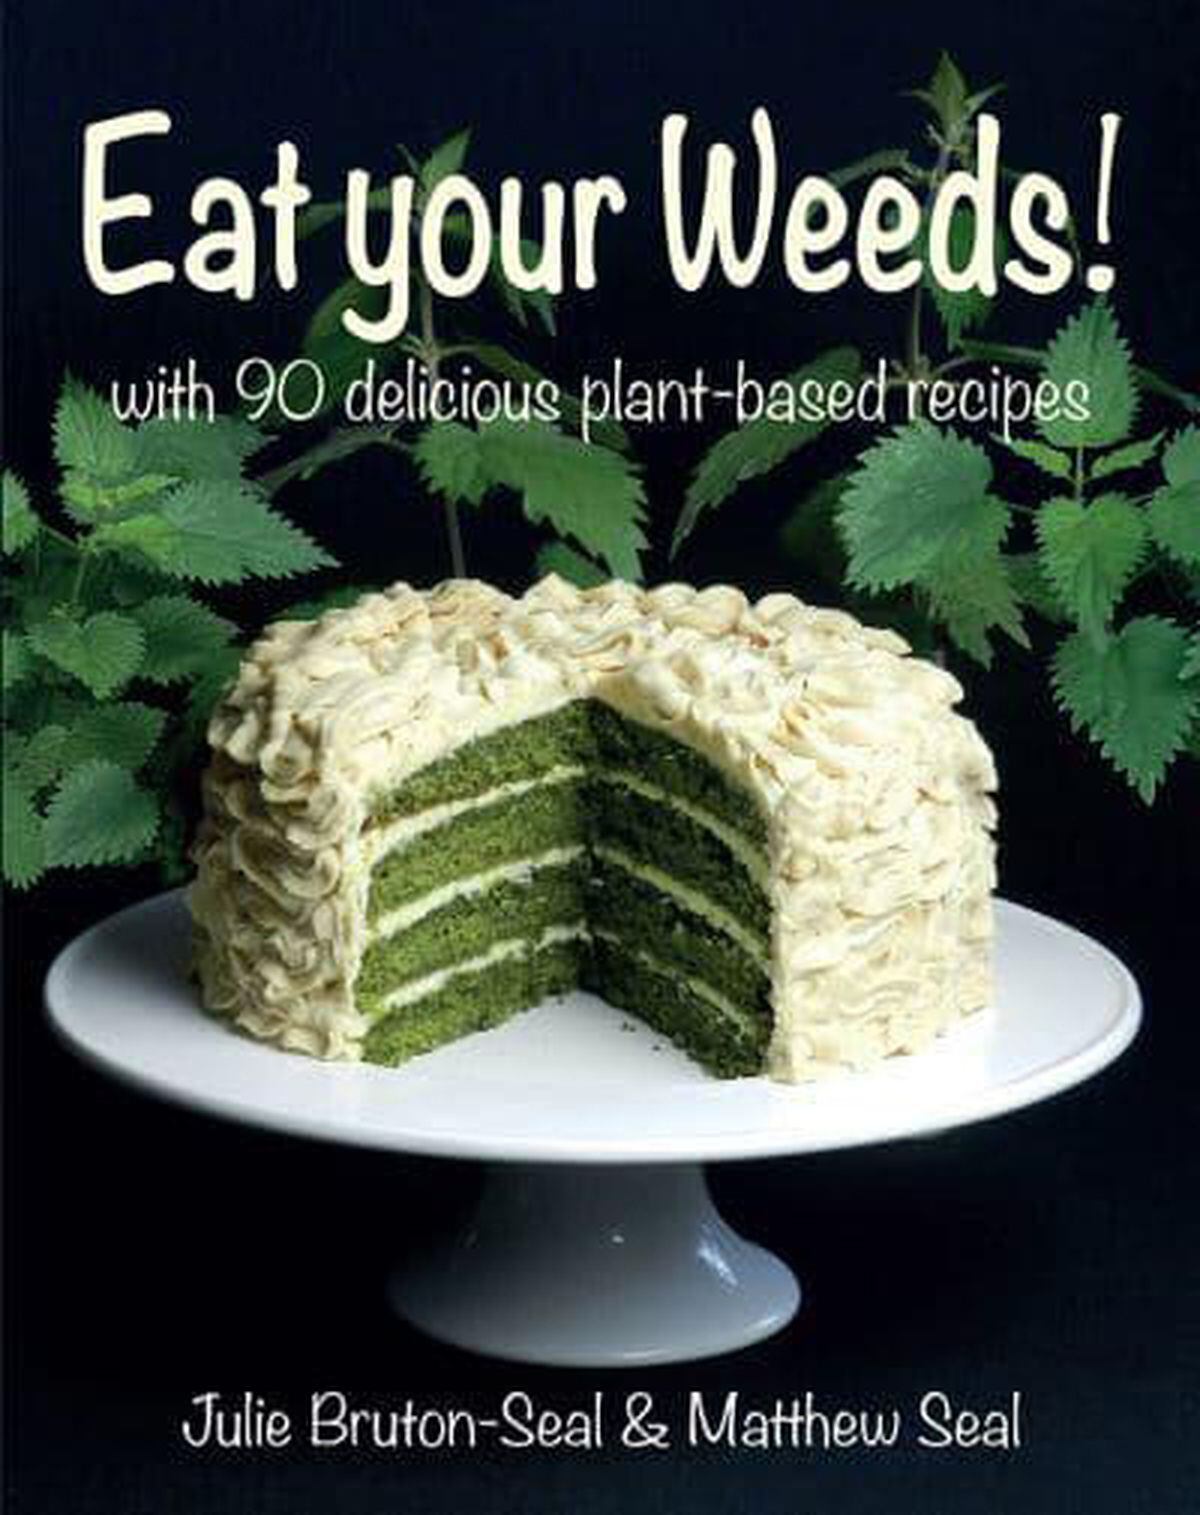 Eat Your Weeds! by Julie Bruton-Seal and Matthew Seal. 